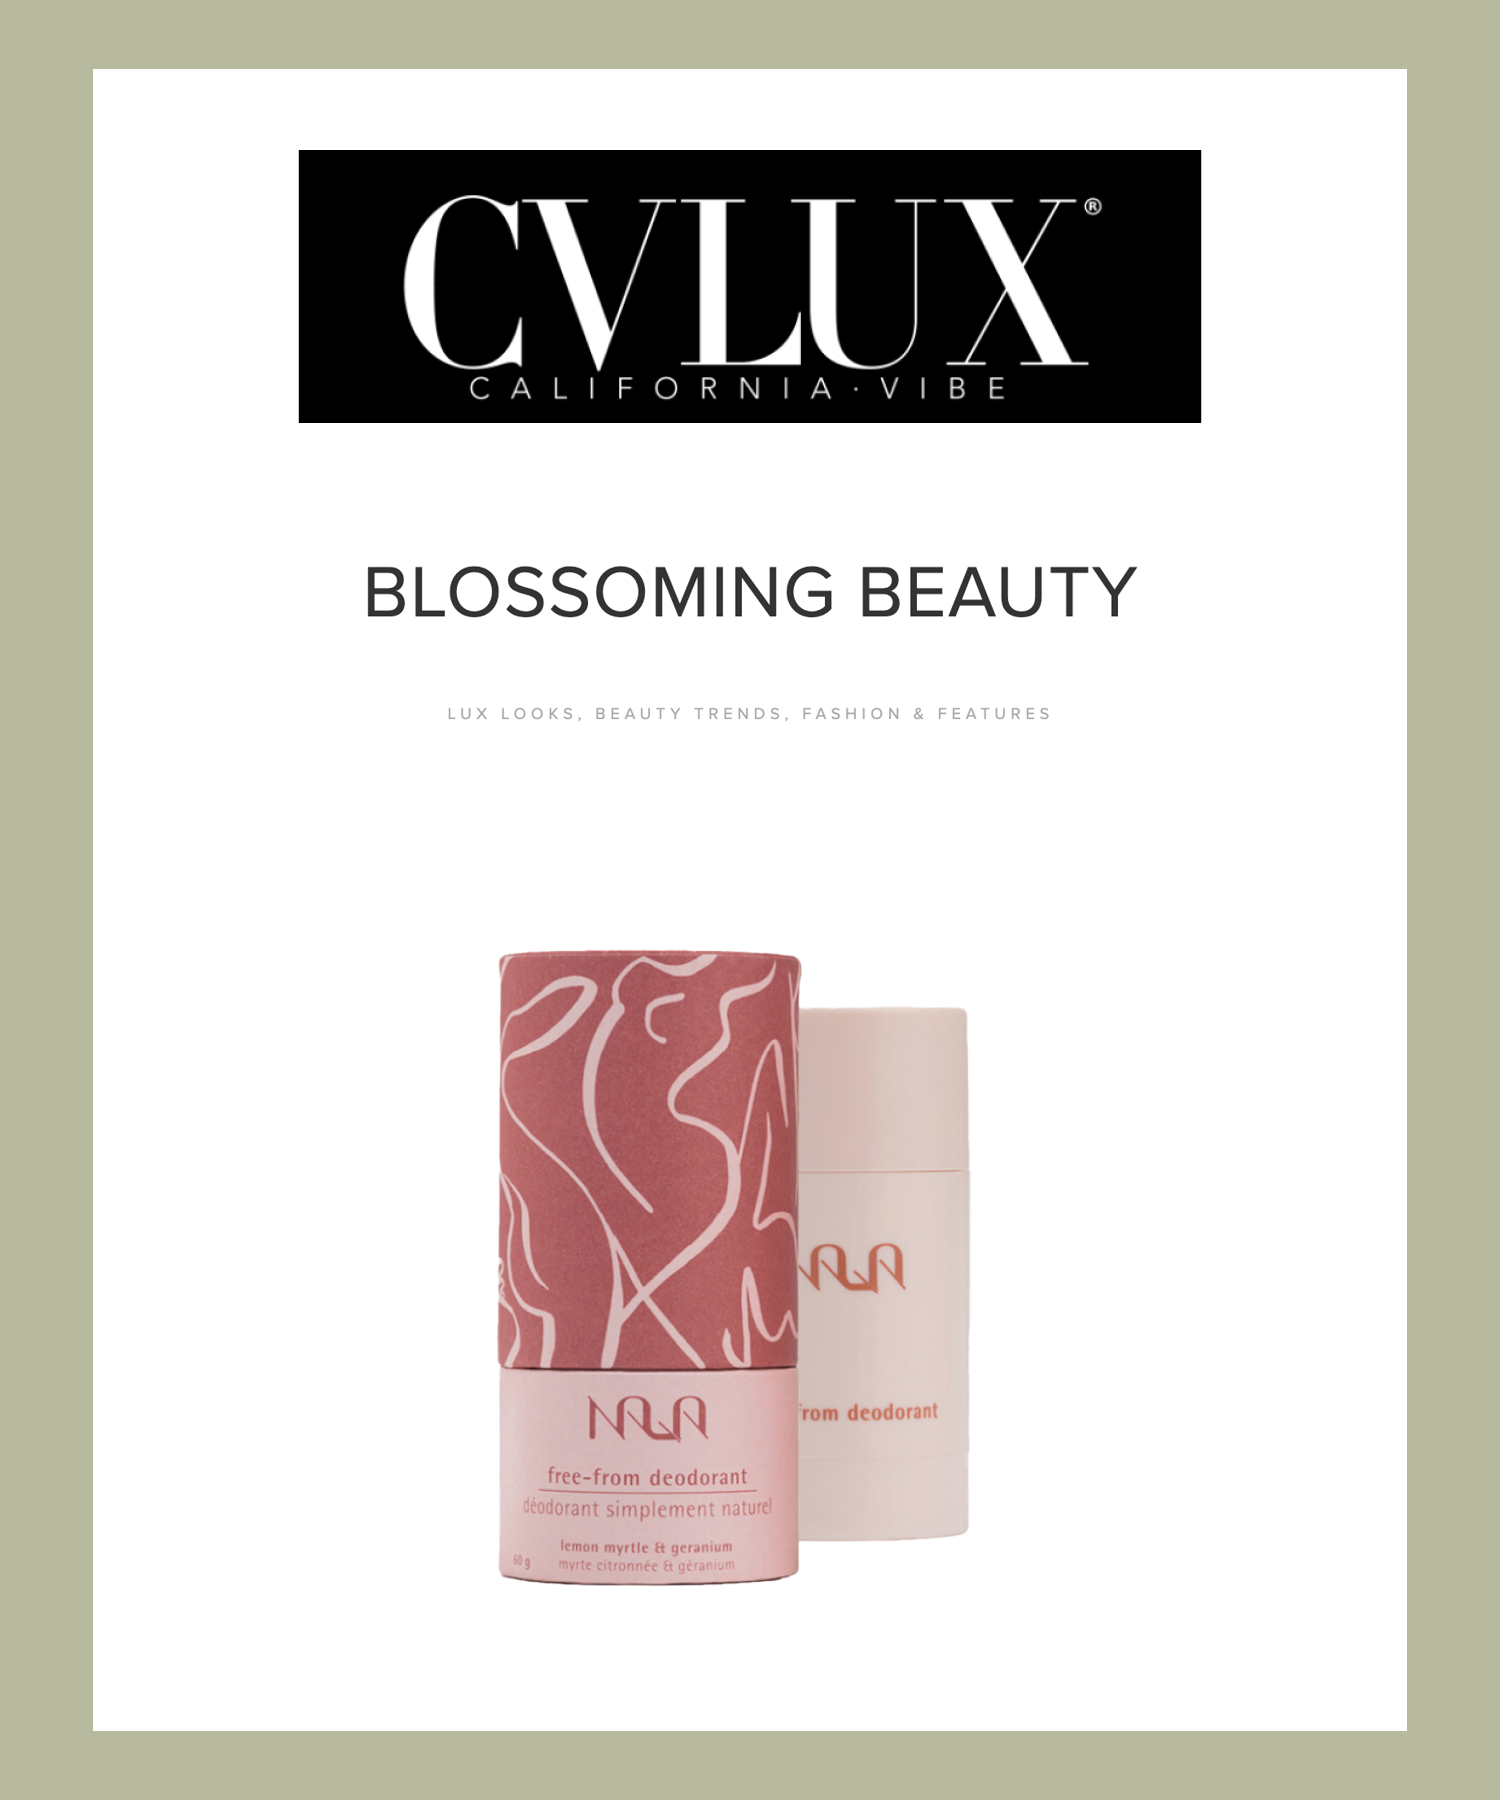 CVLUX: Blossoming Beauty